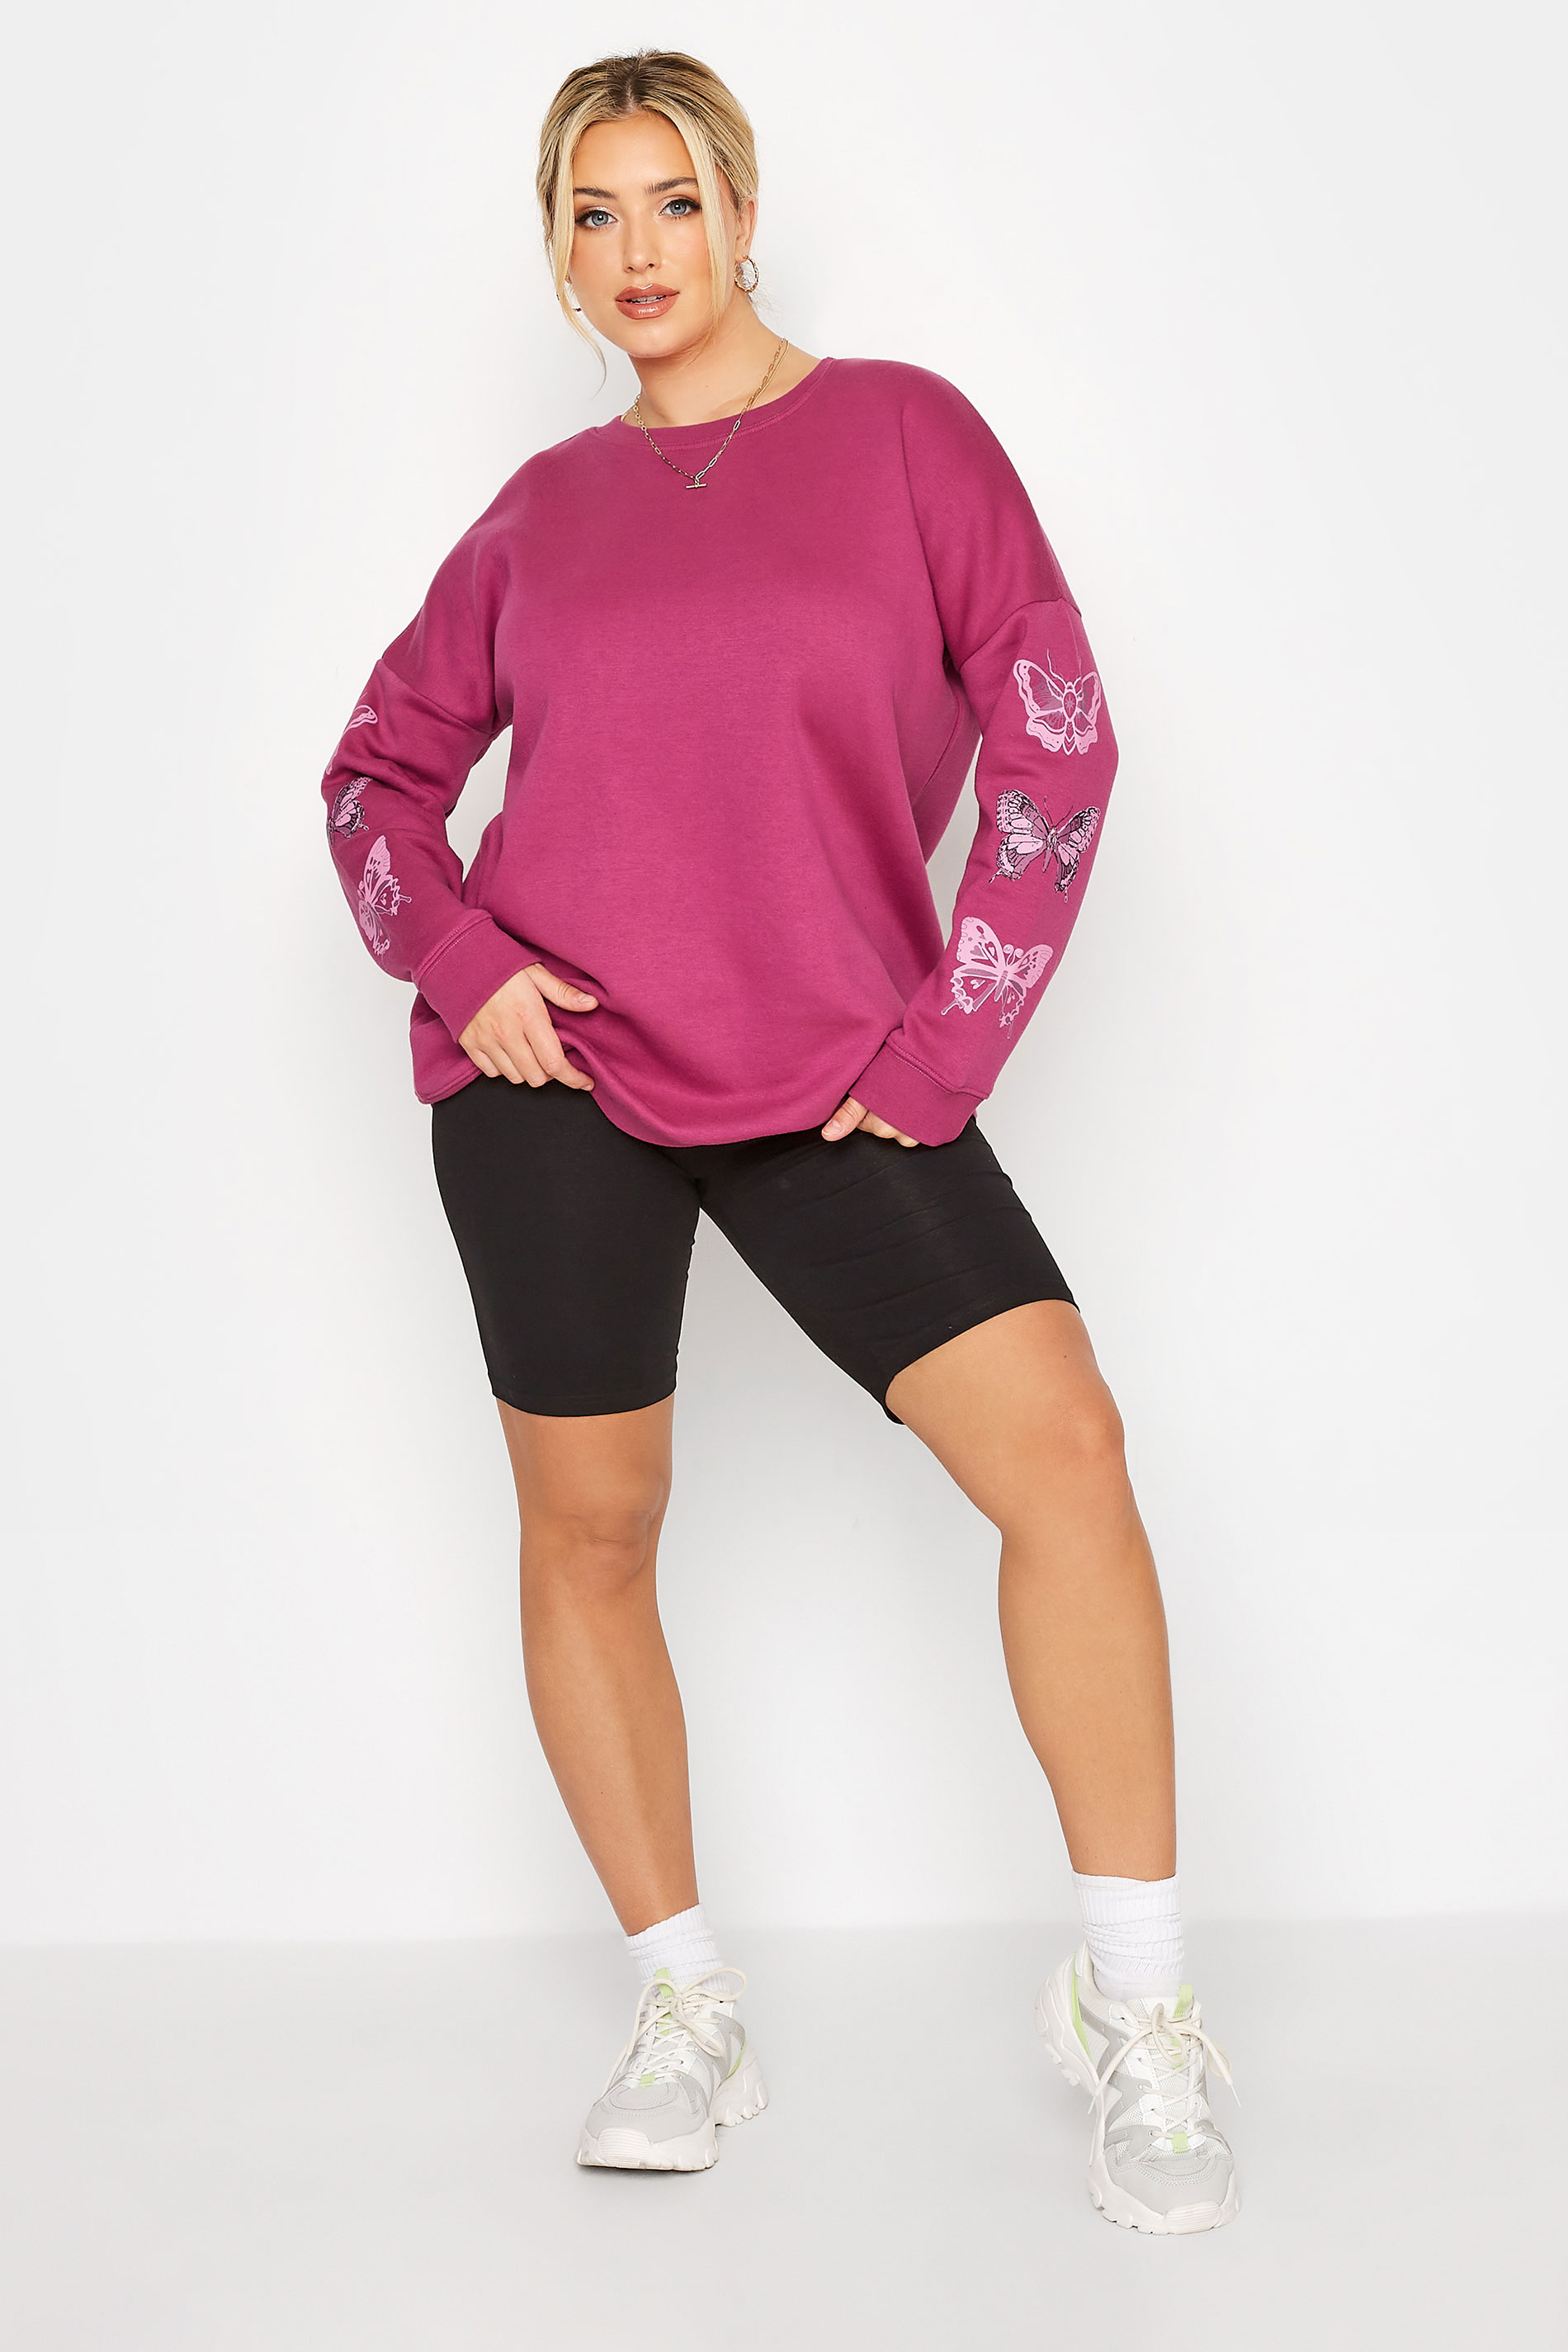 LIMITED COLLECTION Plus Size Pink Butterfly Sleeve Soft Touch Sweatshirt | Yours Clothing 3